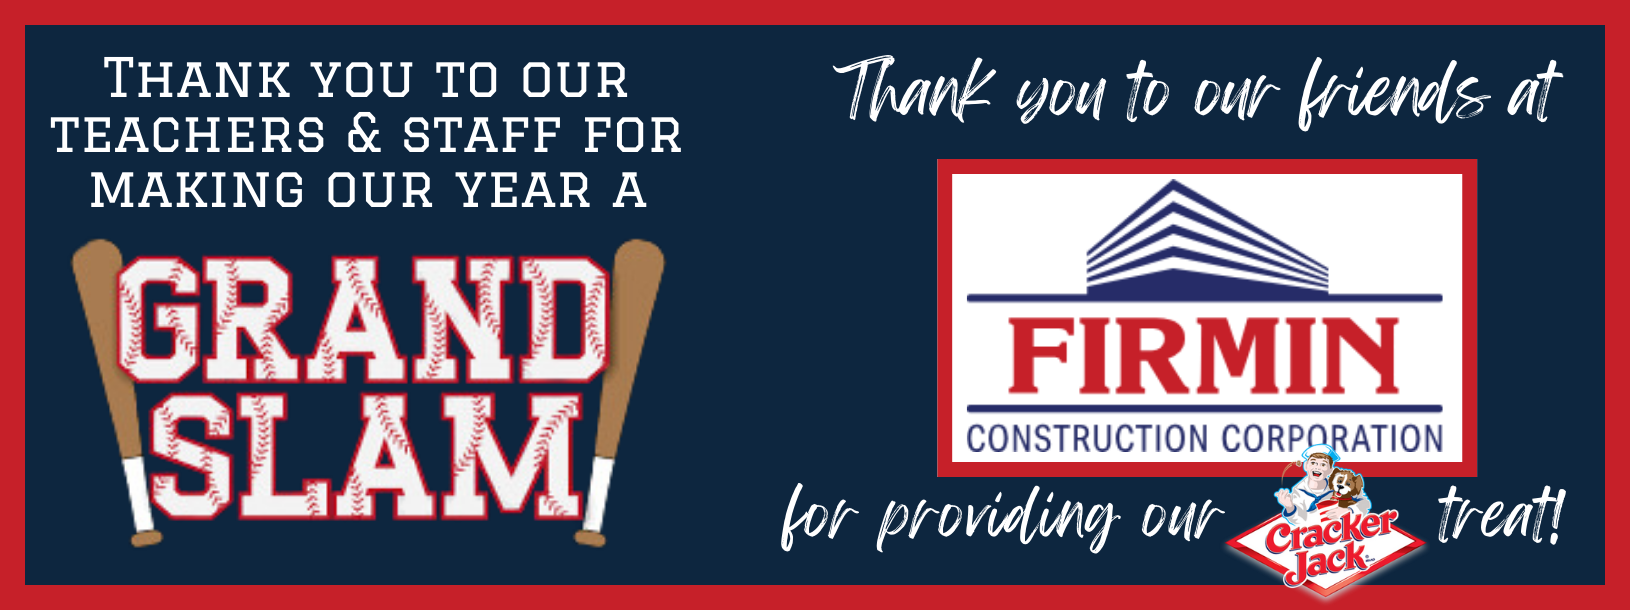 Thank you to our teachers and staff for making our year a grand slam! Thank you to our friends at Firmin Construction Corporation for providing our Cracker Jack treat! 